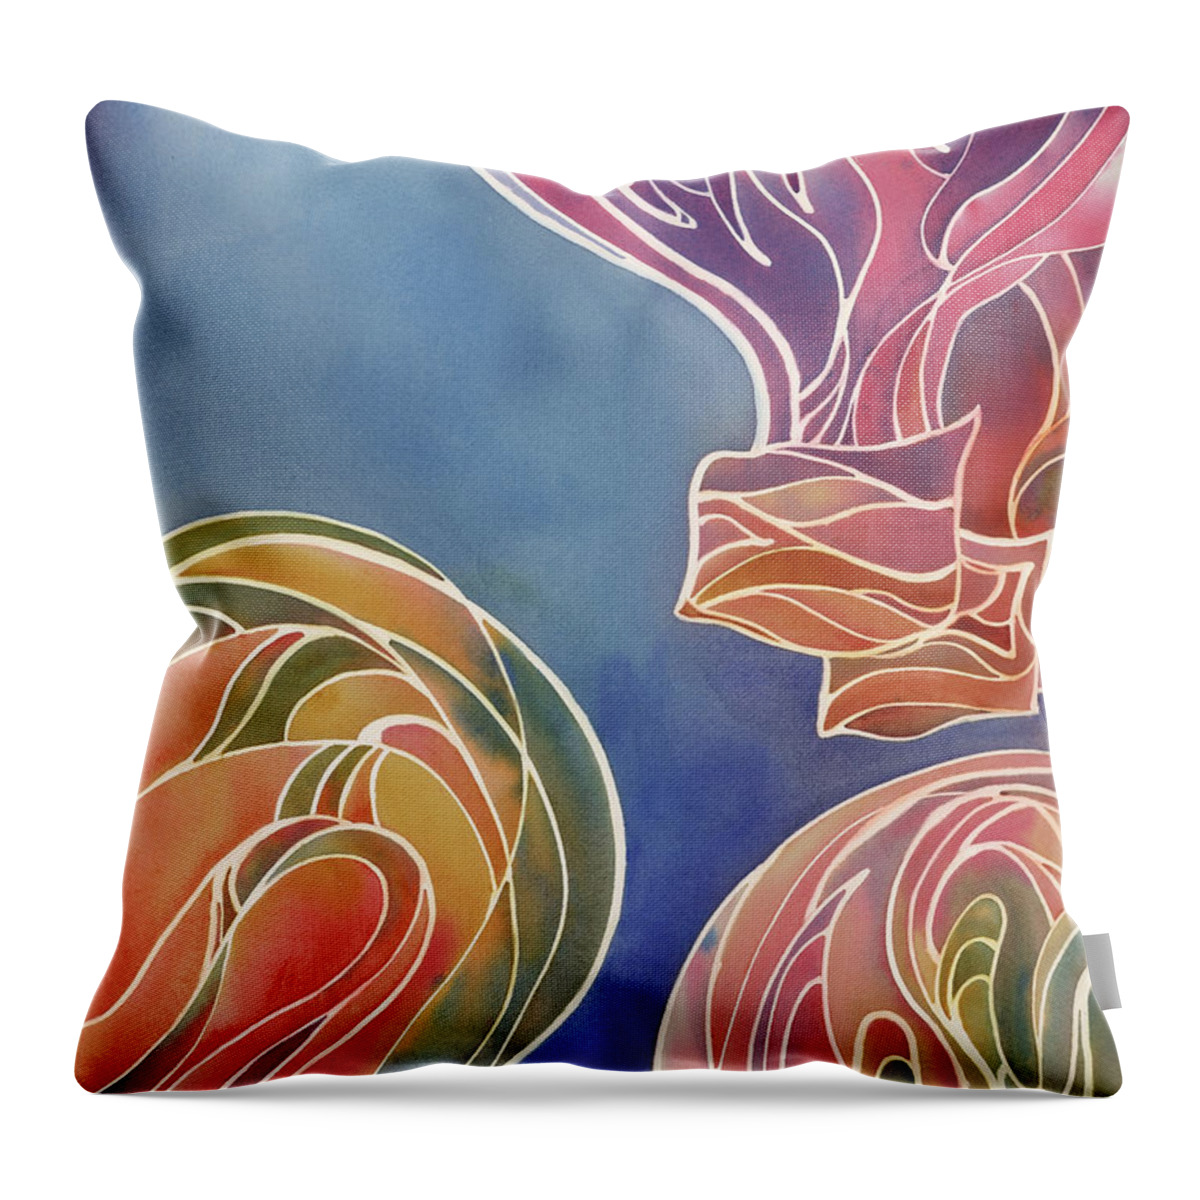 Watercolor Throw Pillow featuring the painting Balloons III by Johanna Axelrod